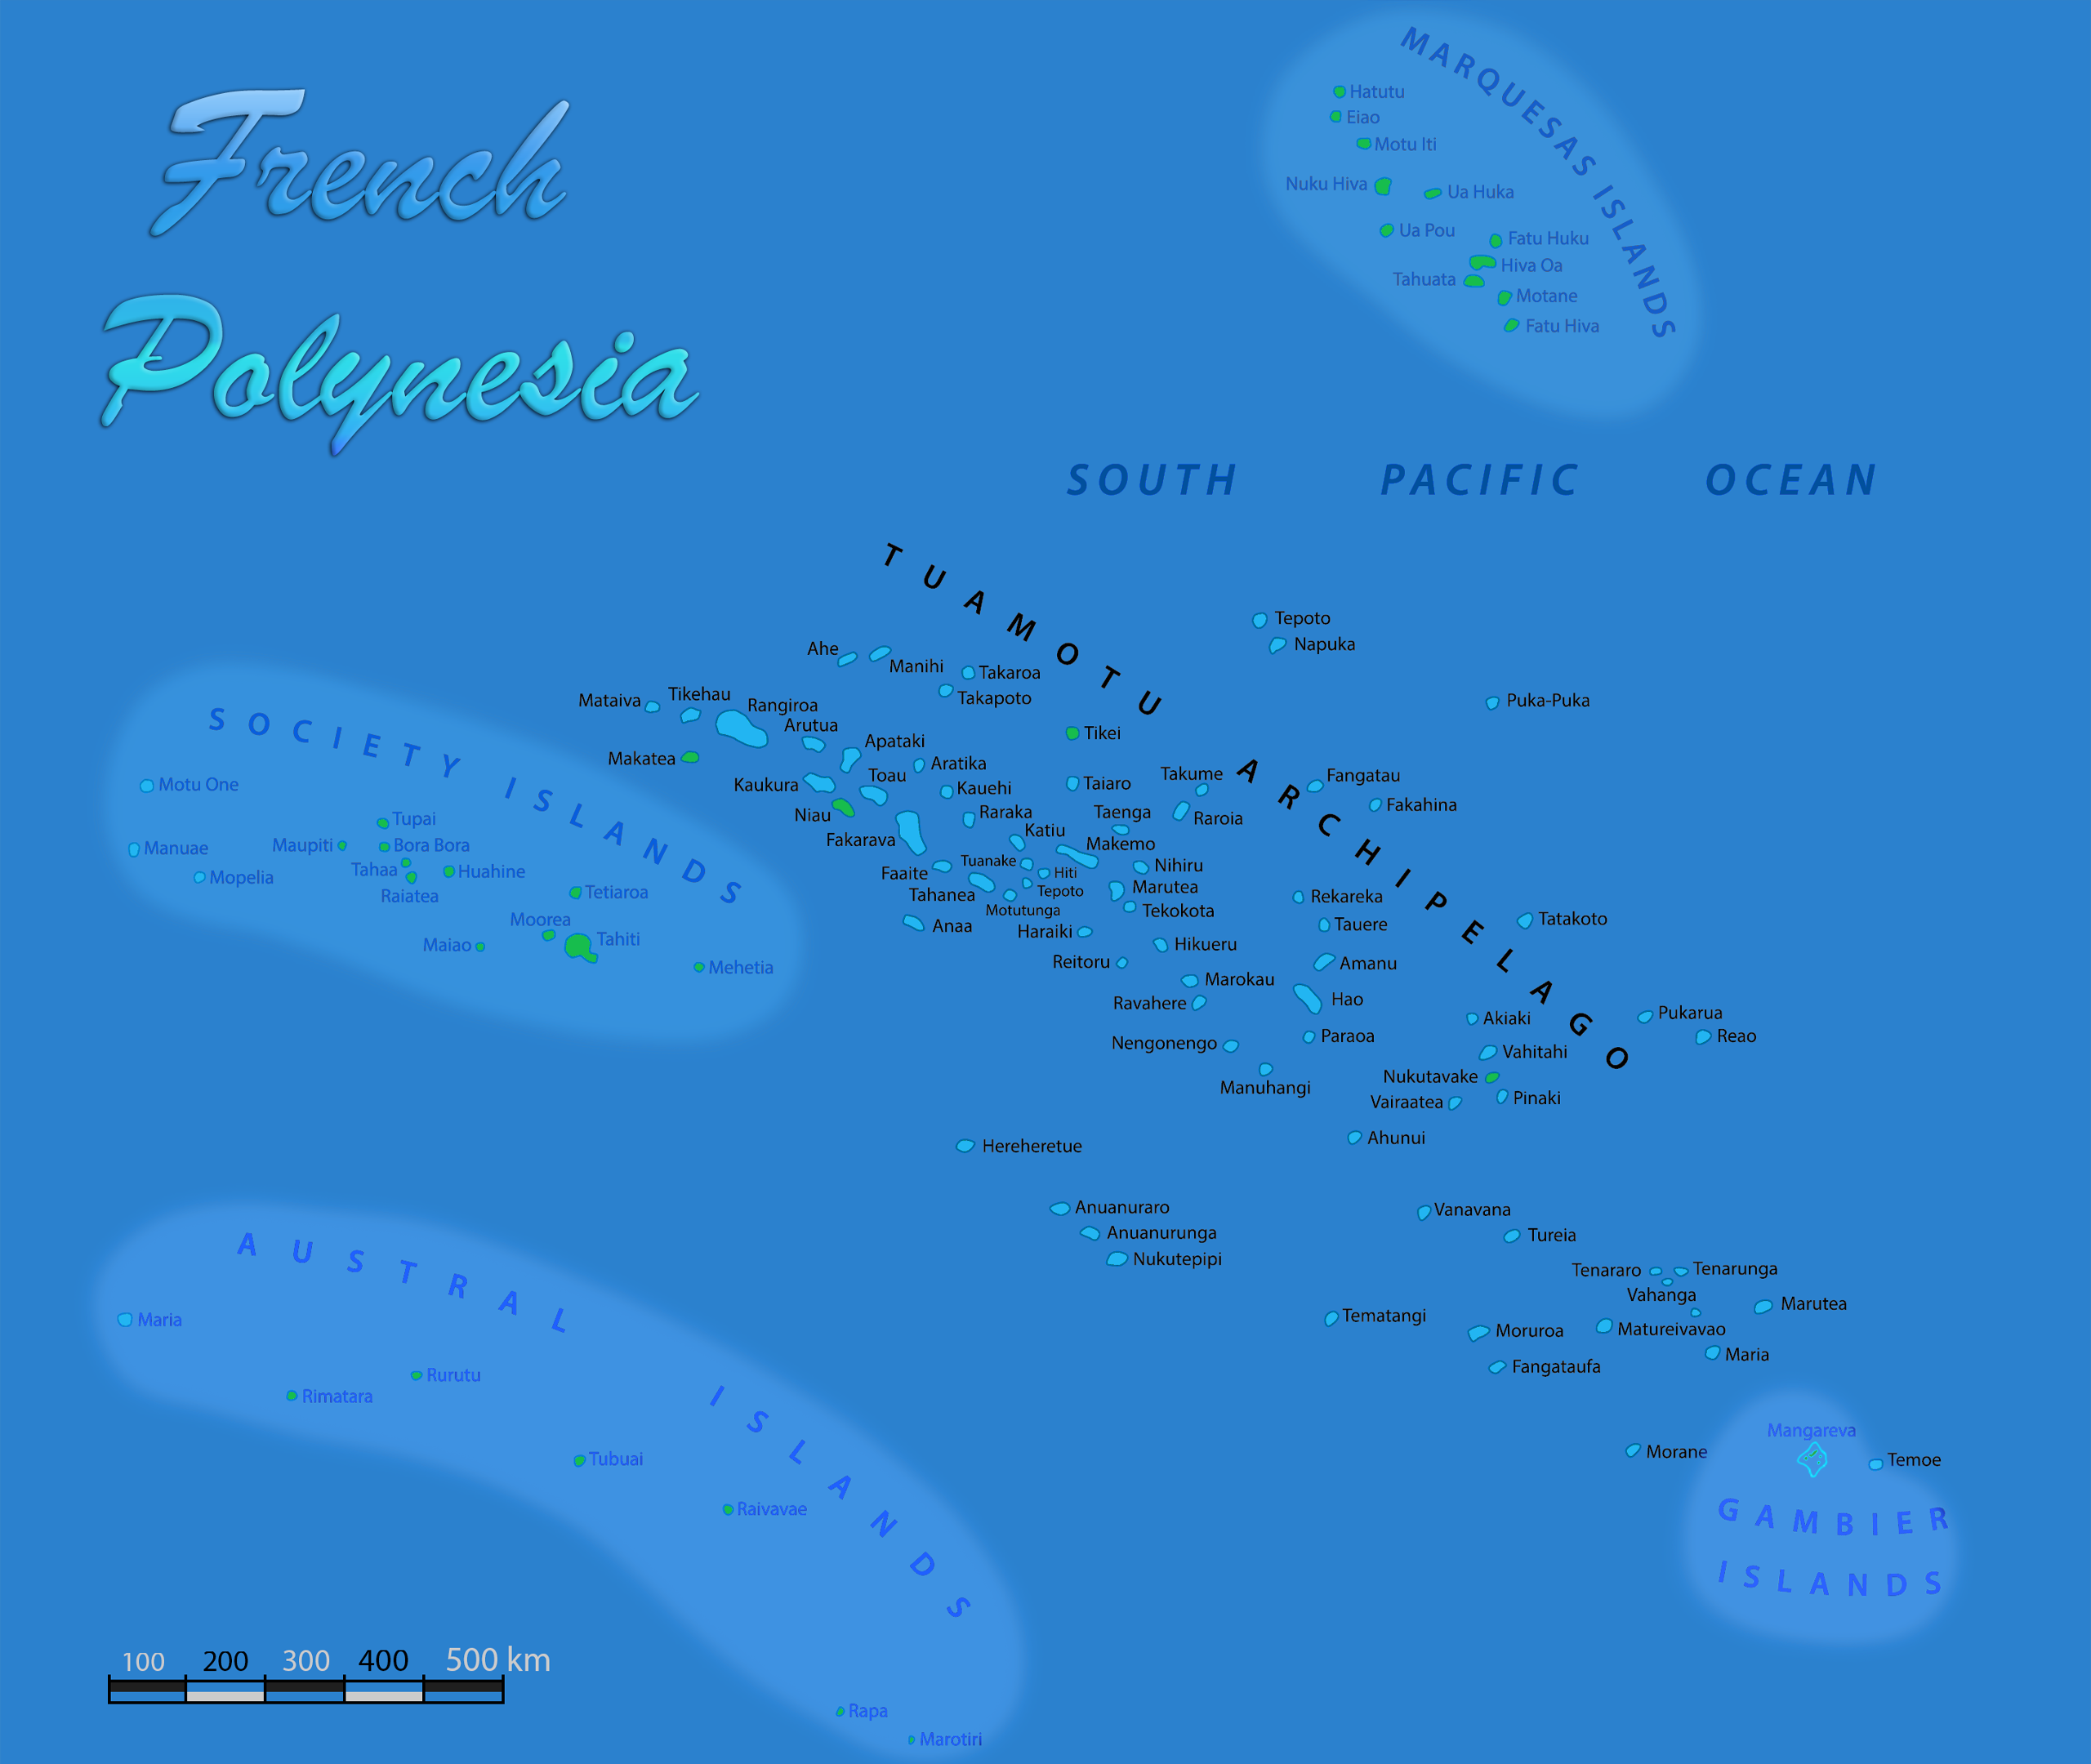 French Polynesia: The Gambier Islands